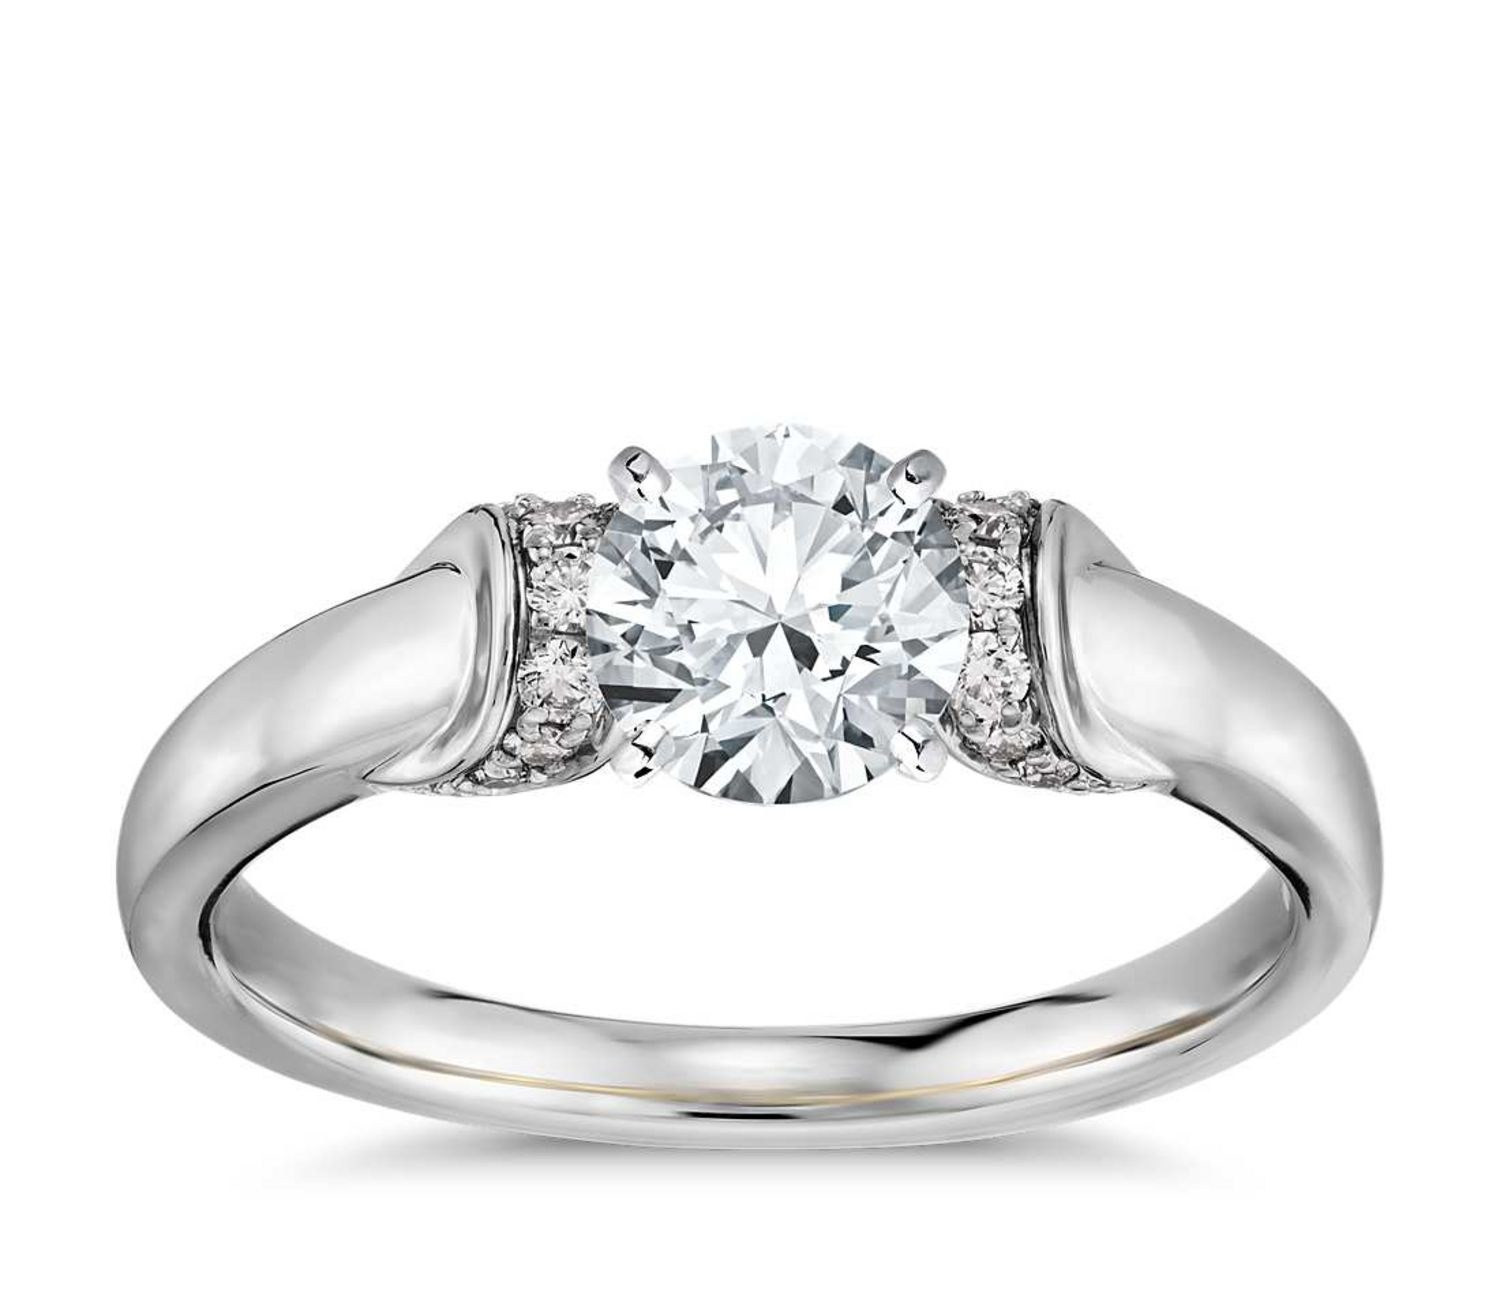 Top Wedding Ring Designers
 Best New Engagement Rings Unique Engagement Rings 2015